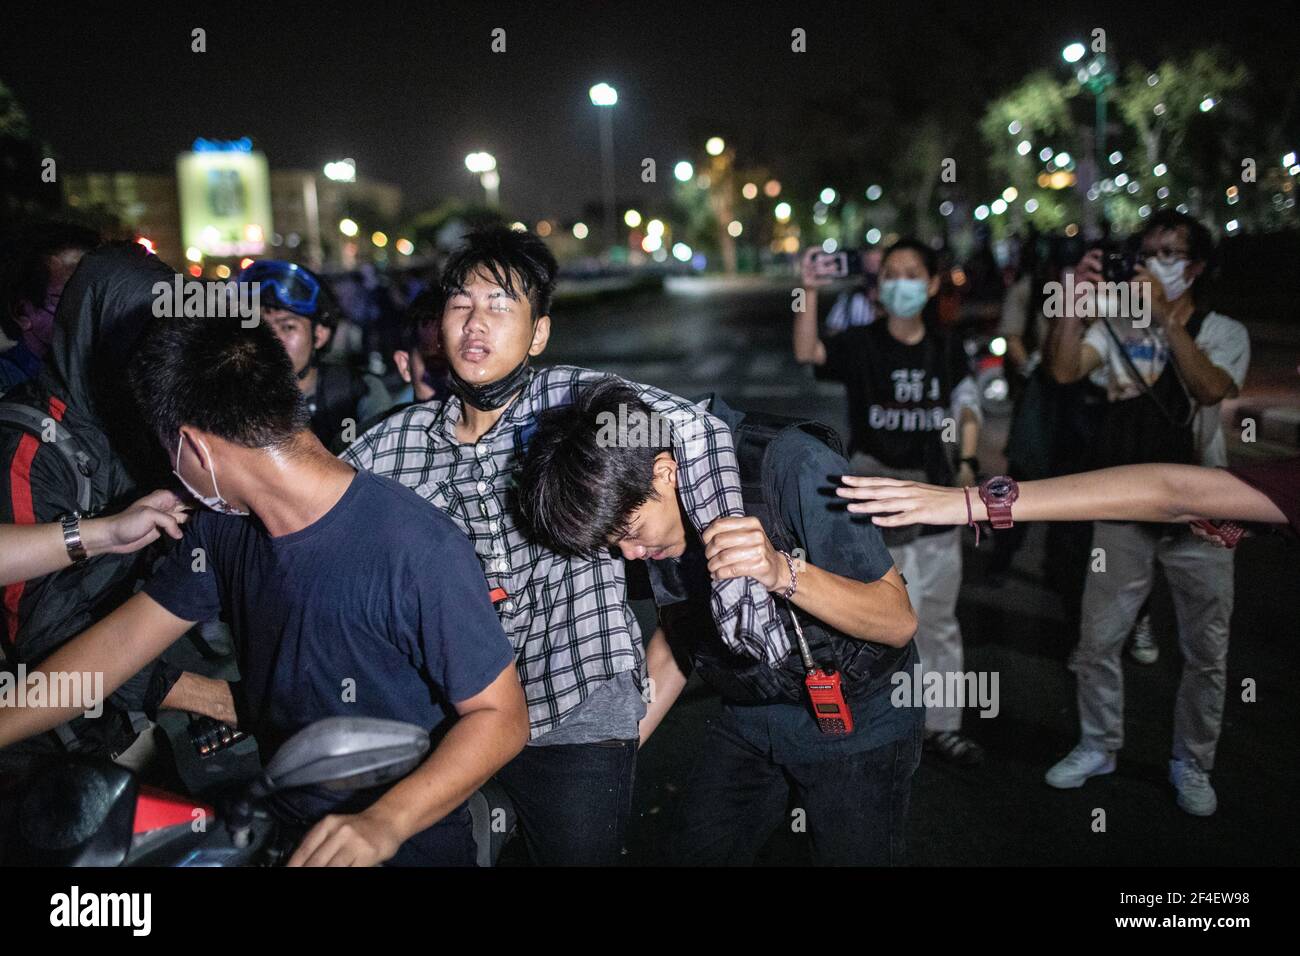 Pro democracy protesters help an injured protester to get out to a safer place during an anti-government demonstration in Bangkok. Thousands of pro-democracy protesters gathered near the Grand Palace in Sanam Luang demanding the resignation of Thailand Prime Minister and the reform of the monarchy. The protesters also denounced the use of the Lese Majeste law under the section 112 of the penal code. The protest organized by REDEM (Restart Democracy) ended up with several clashes, the use of water cannon, tear gas and rubber bullet, which had left several injured. (Photo by Geem Drake / SOPA Im Stock Photo